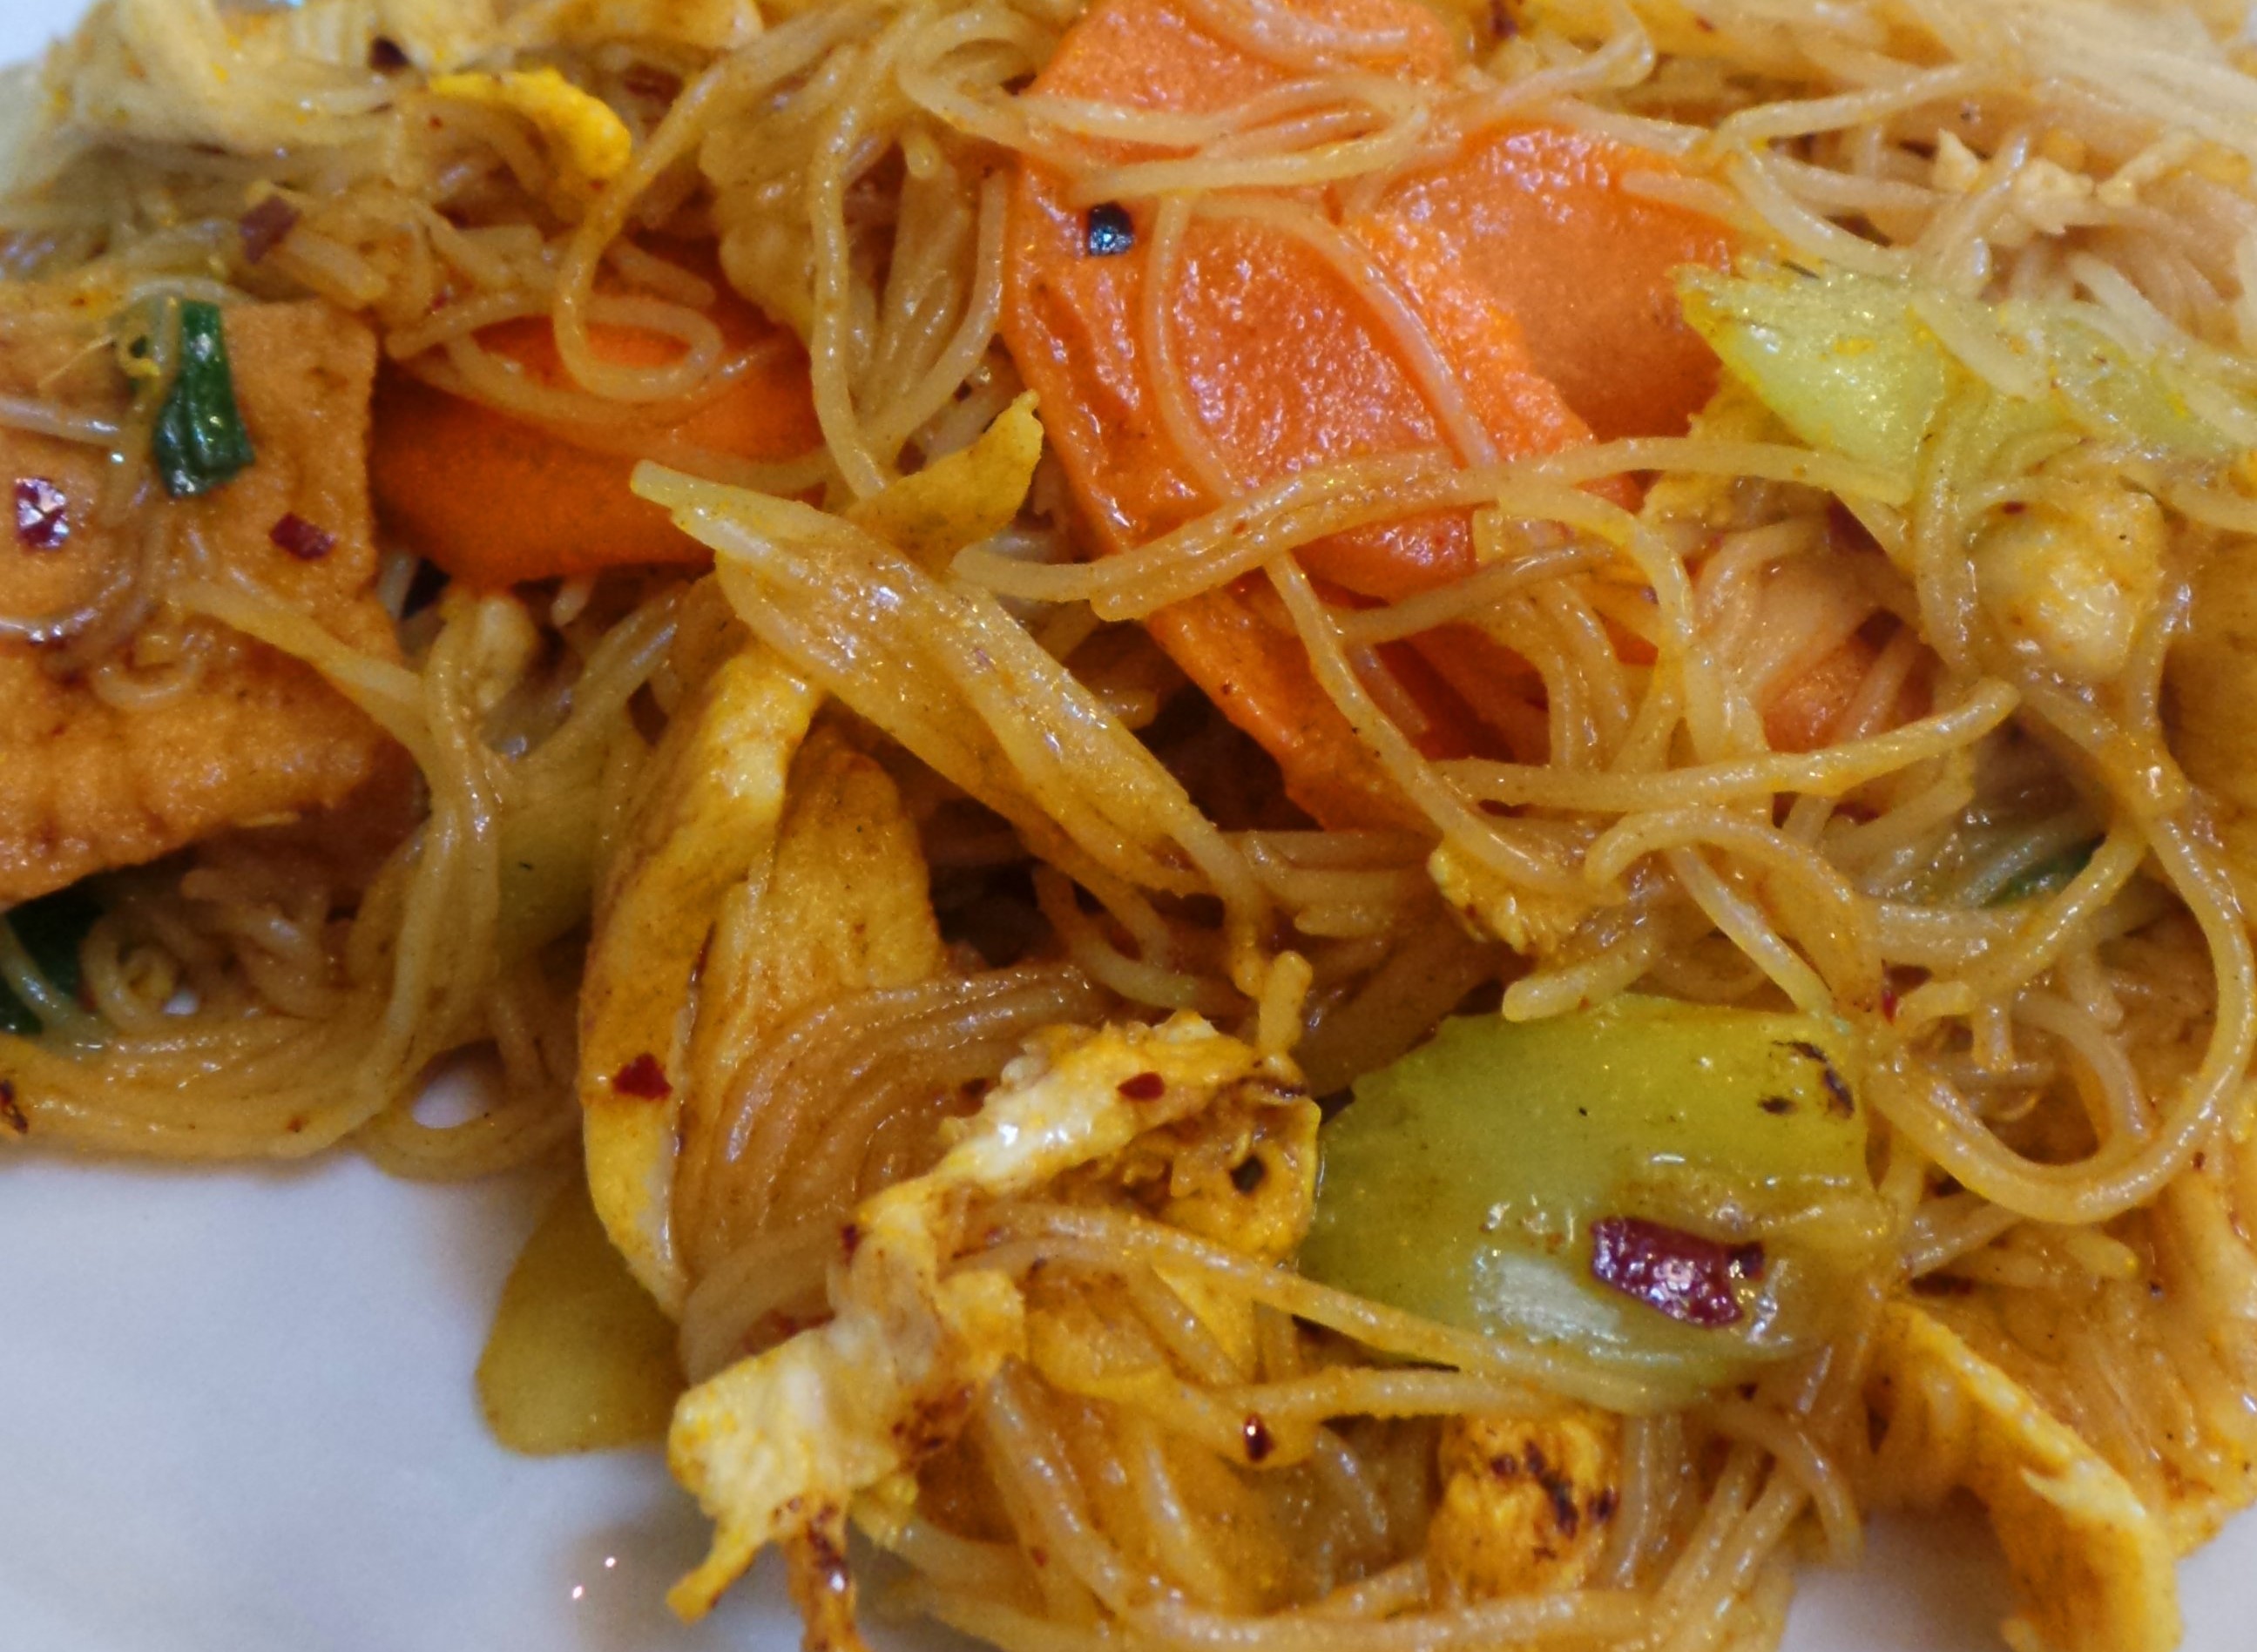 Singapore Noodles from Thai 9. Photo by Alexis Larsen